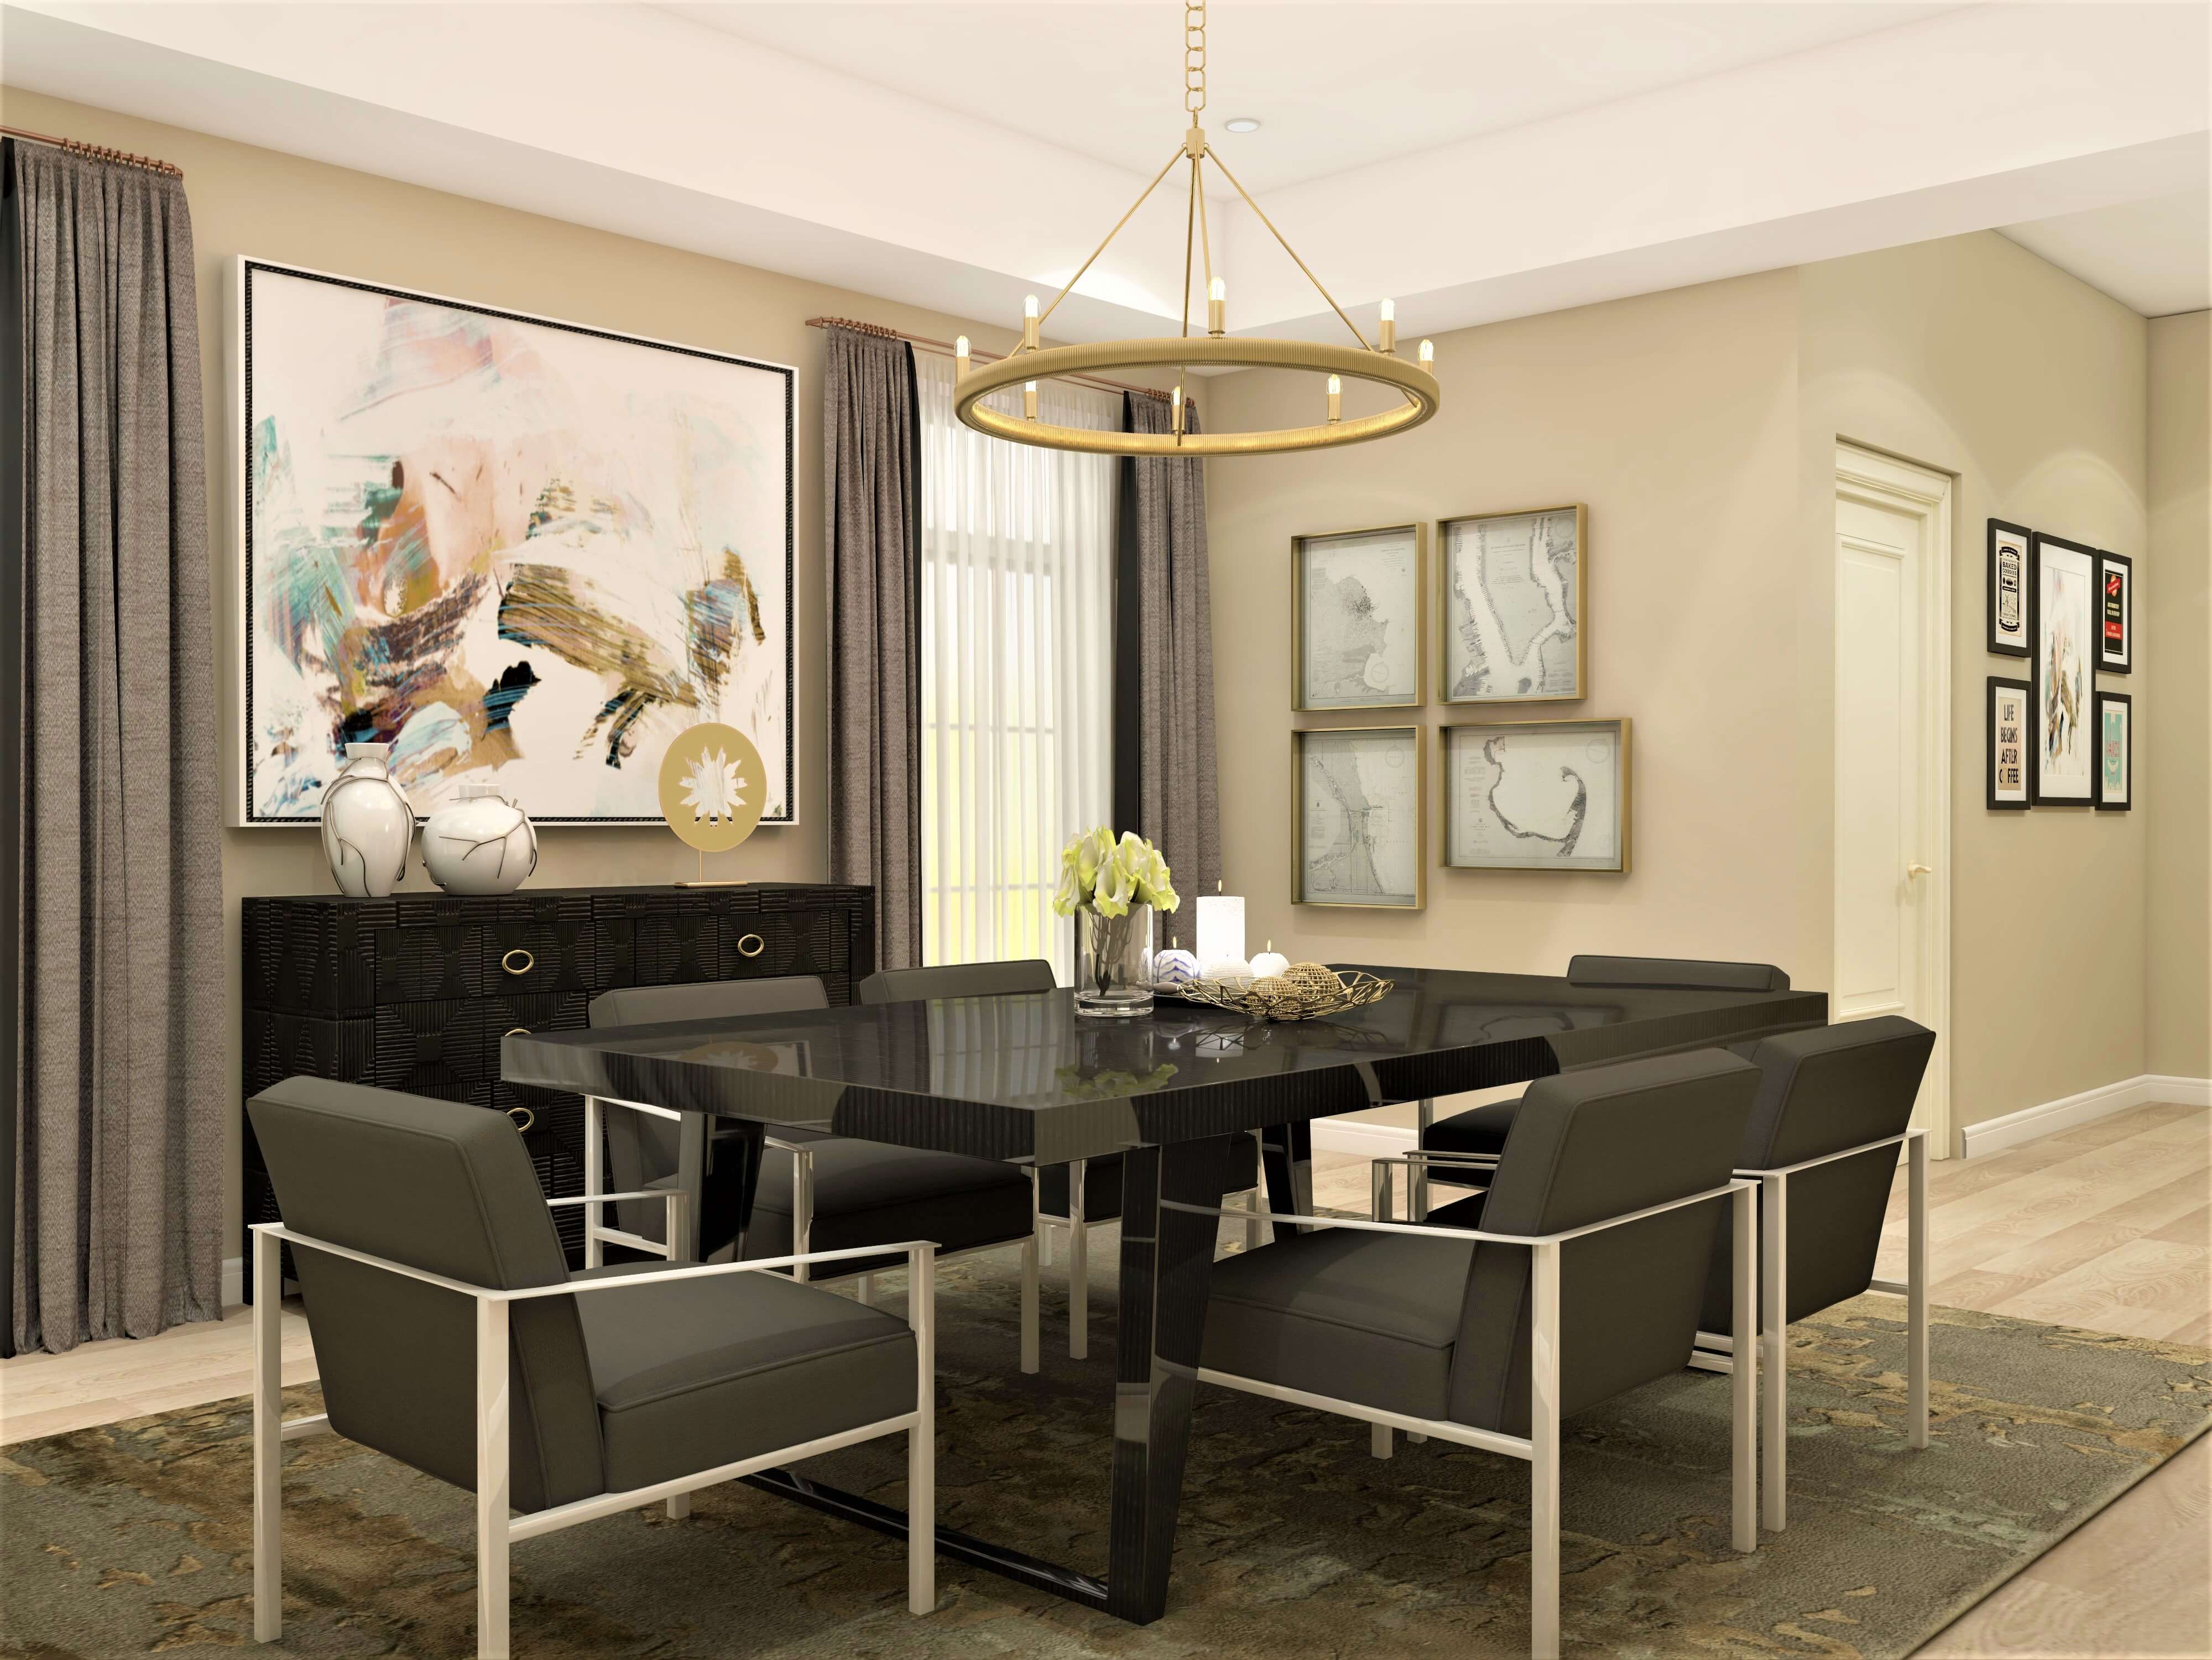 Contemporary style dining room design with chandelier - Beautiful Homes